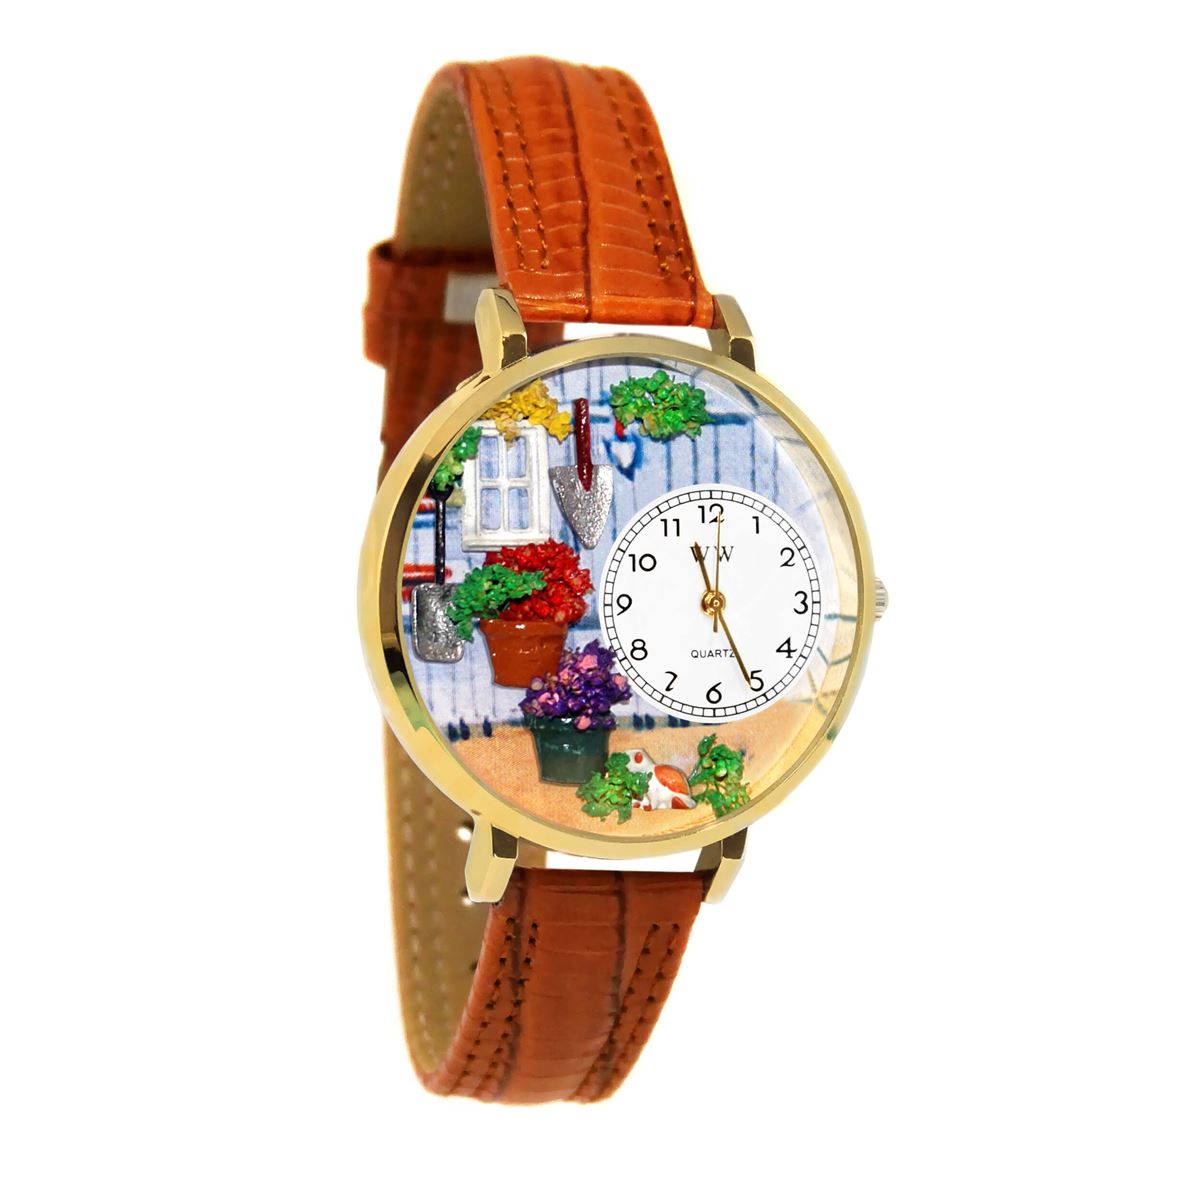 Whimsical Gifts | Gardening 3D Watch Large Style | Handmade in USA | Hobbies & Special Interests | Outdoor Hobbies | Novelty Unique Fun Miniatures Gift | Gold Finish Tan Leather Watch Band